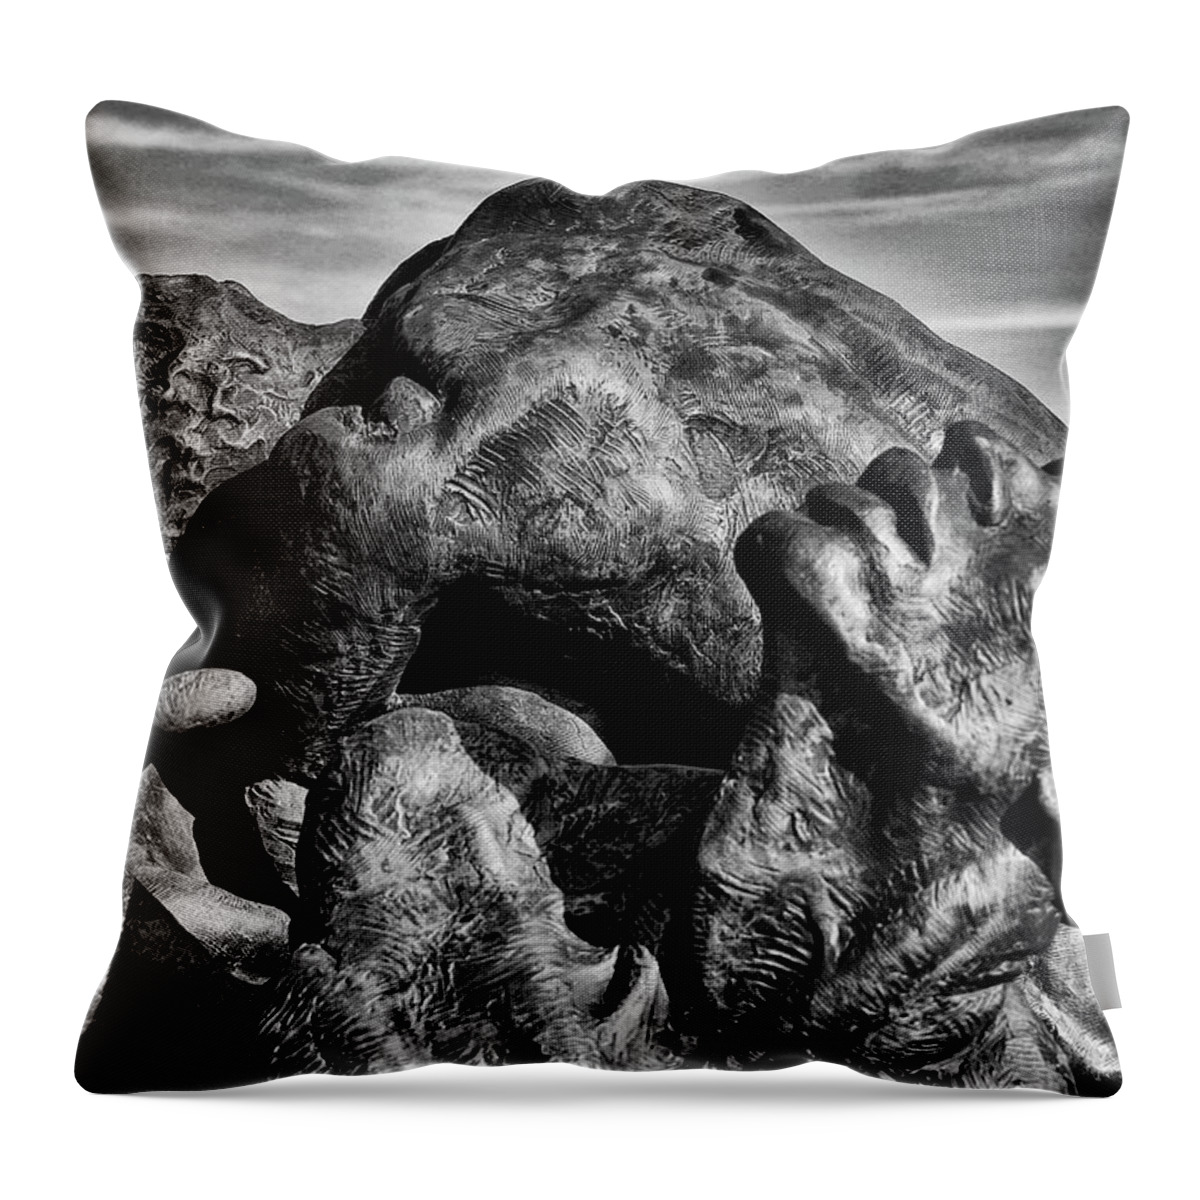 Torment Throw Pillow featuring the photograph Torment In Black And White by James DeFazio